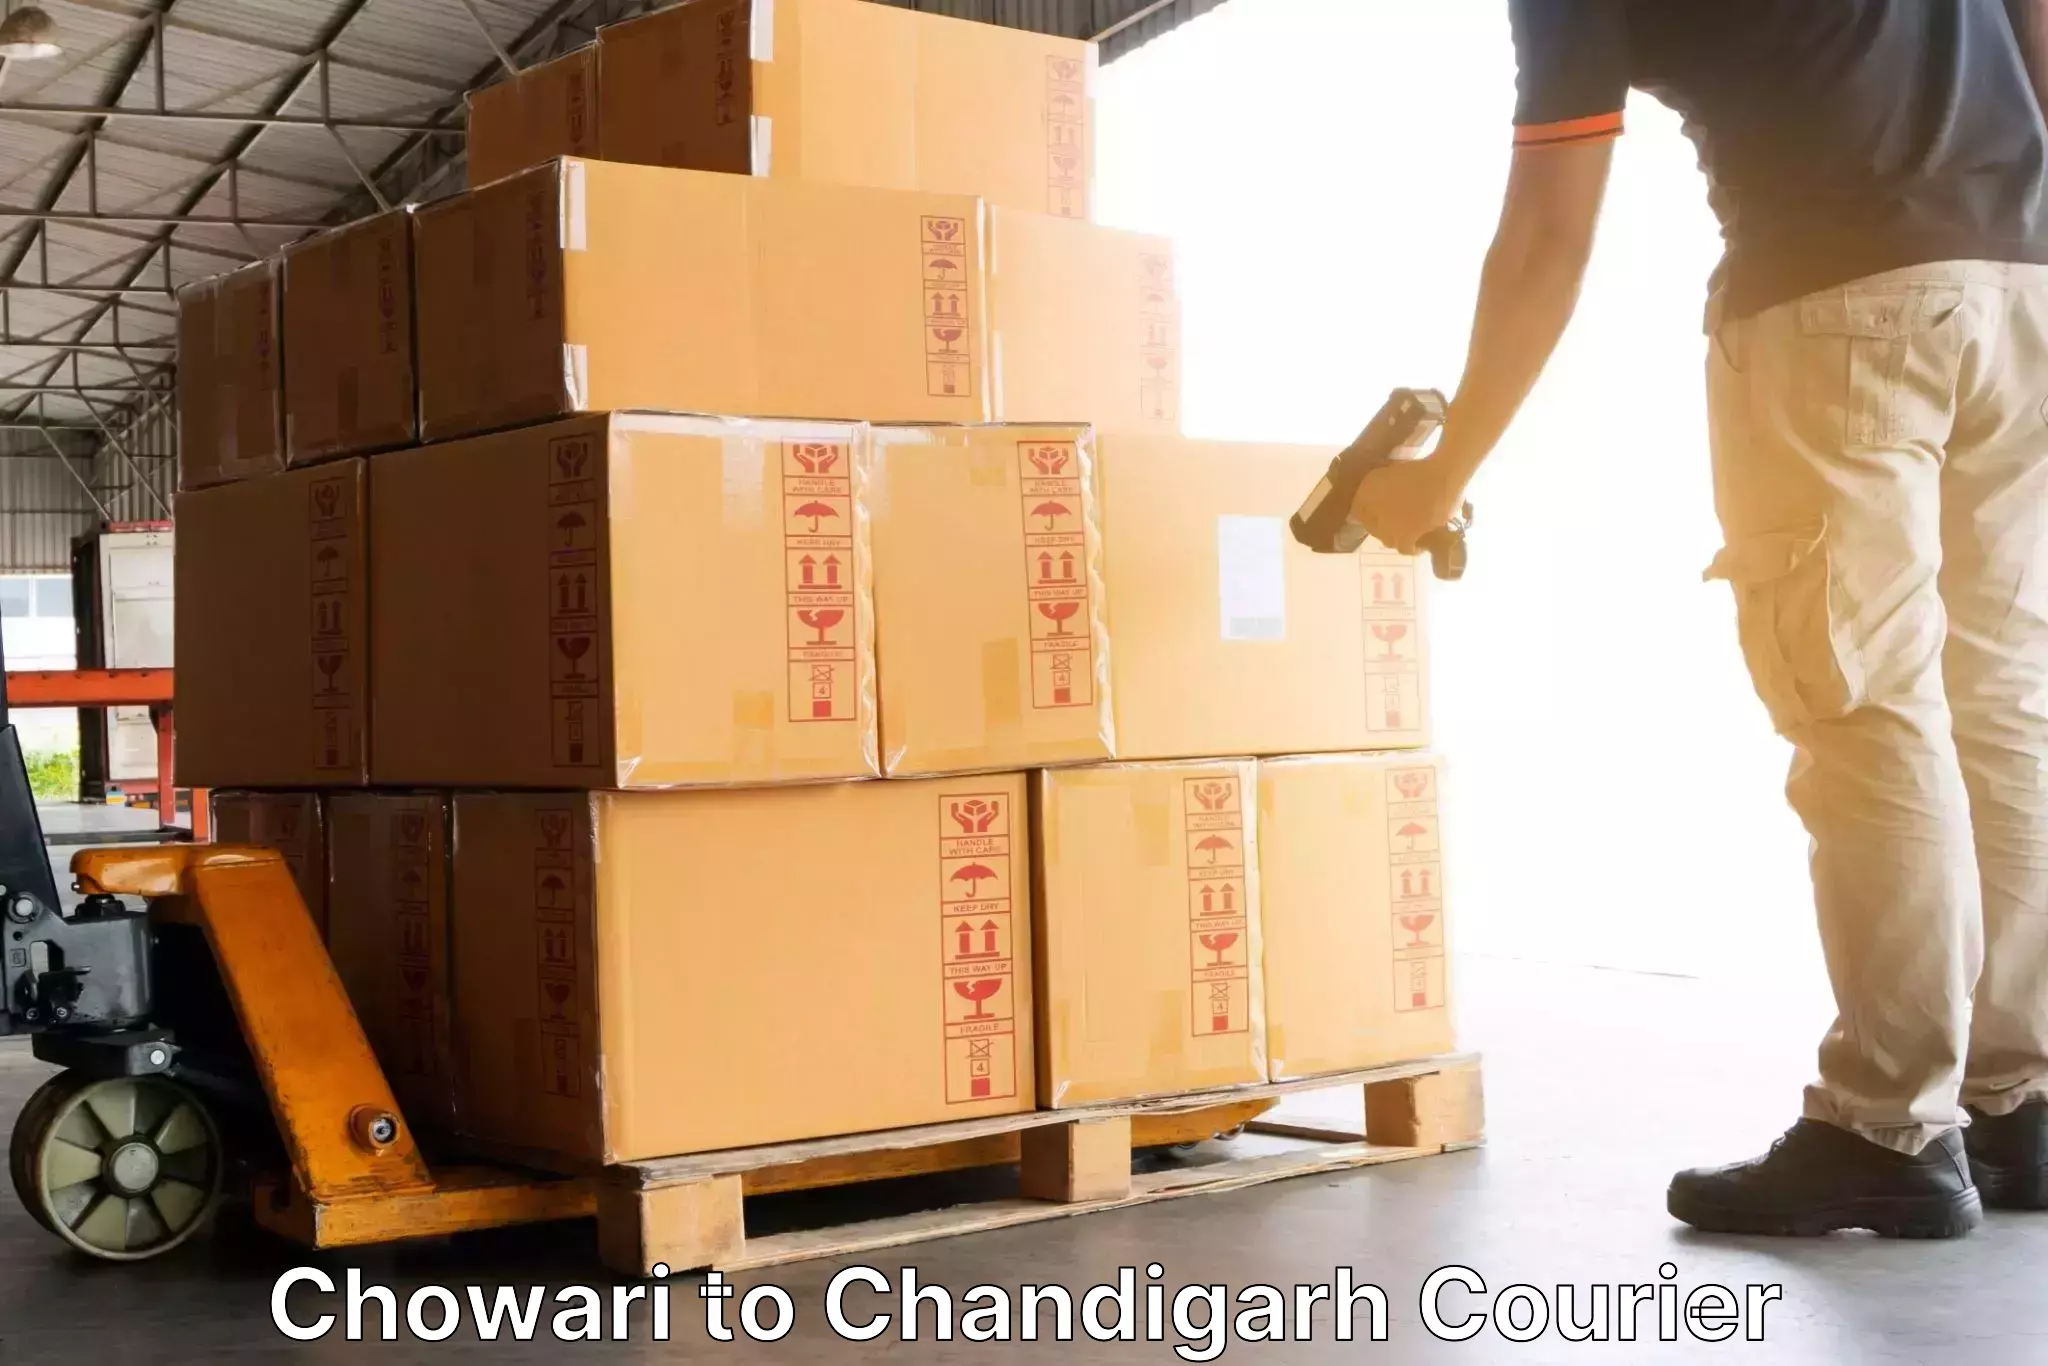 State-of-the-art courier technology Chowari to Chandigarh